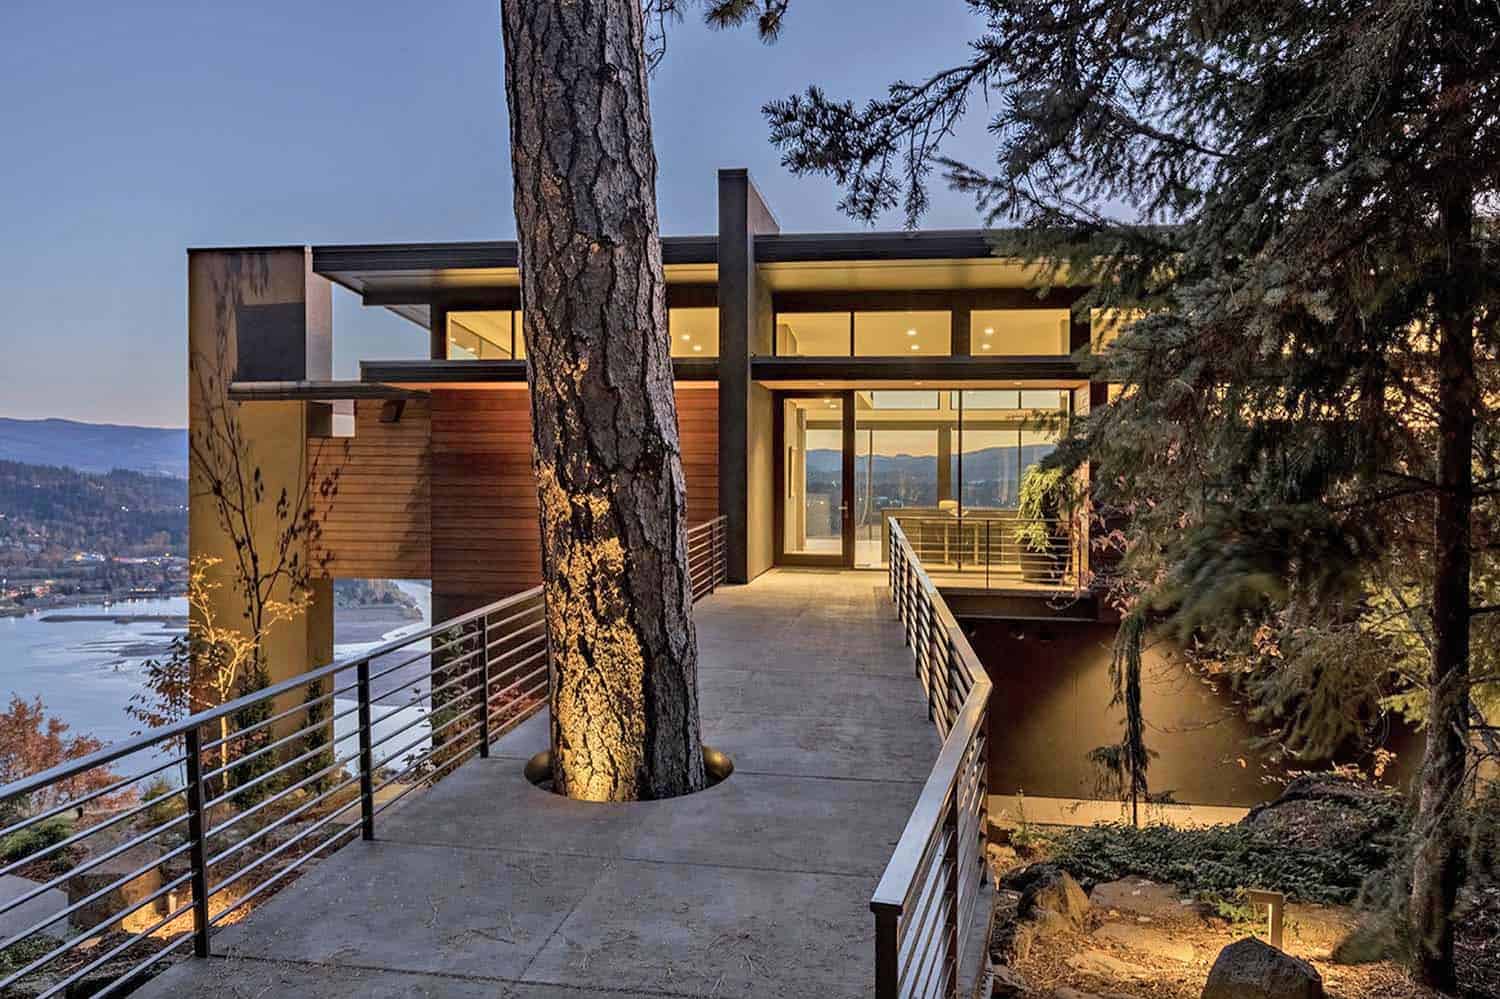 Tour this spectacular cliff house retreat perched over the Columbia River